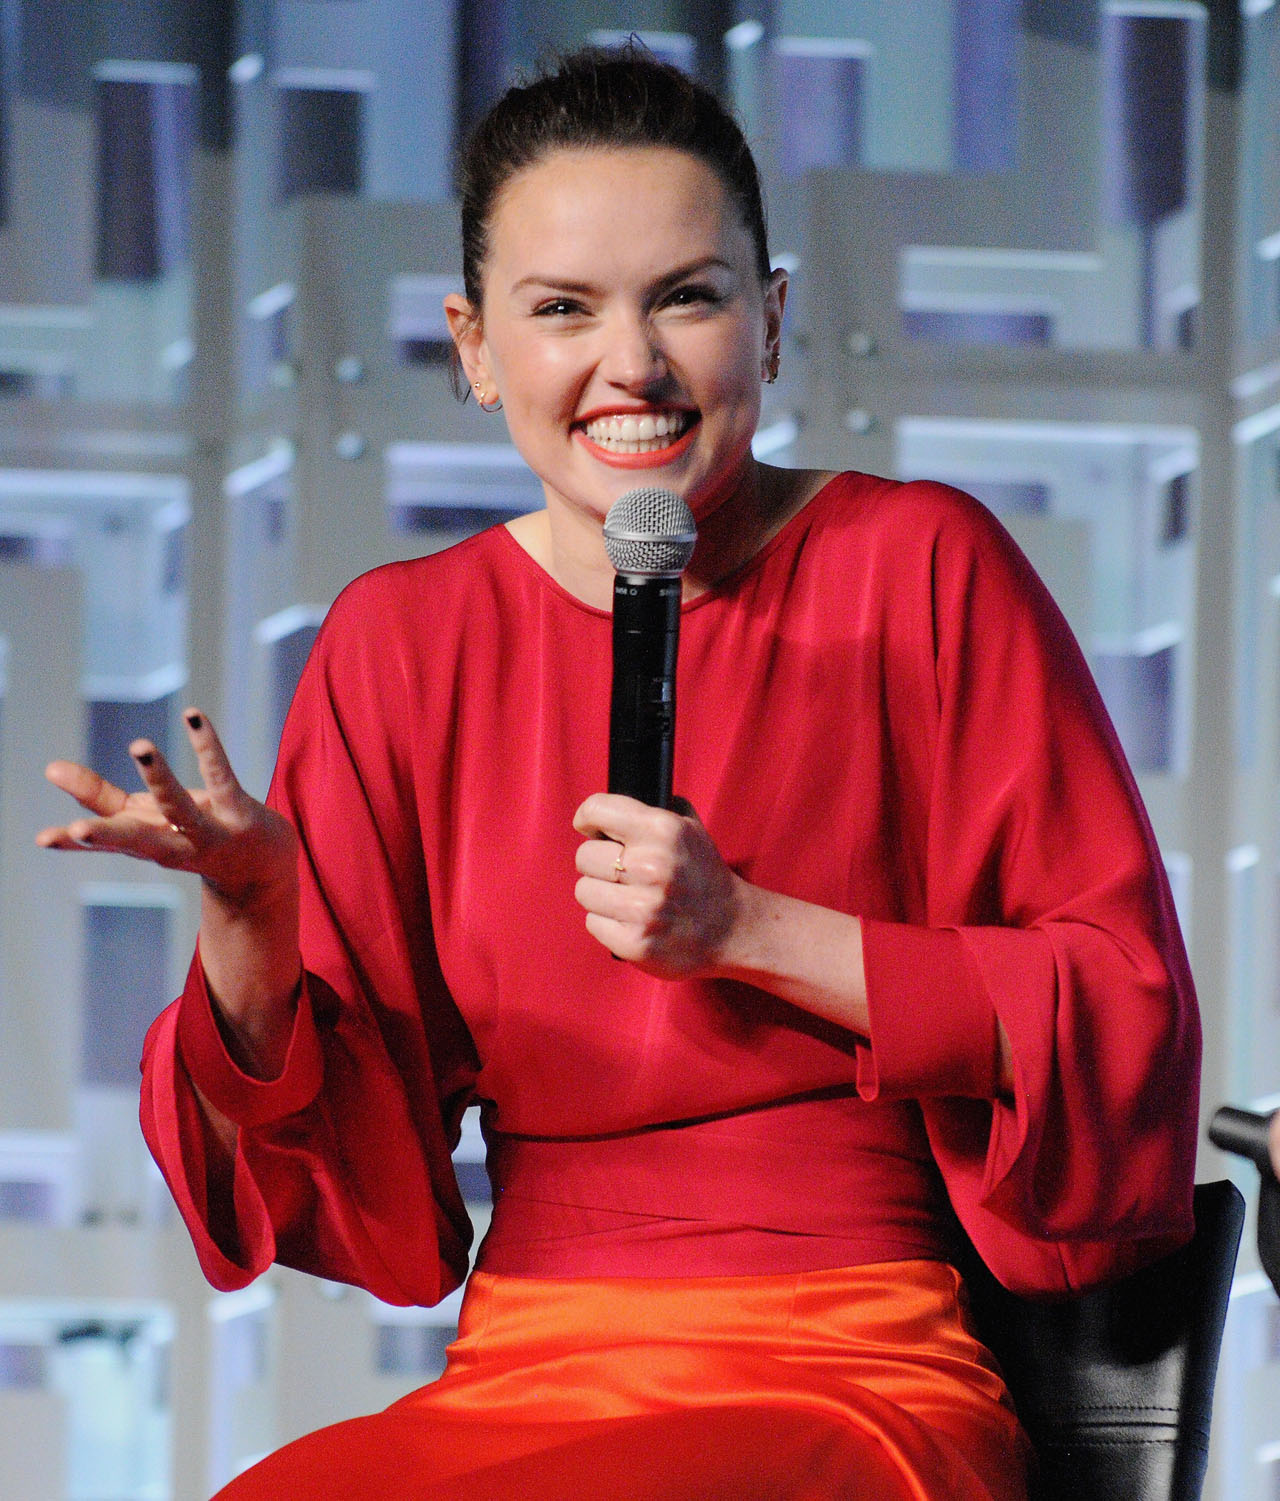 ORLANDO, FL - APRIL 14:  Daisy Ridley attends the STAR WARS: THE LAST JEDI PANEL during the 2017 STAR WARS CELEBRATION at Orange County Convention Center on April 14, 2017 in Orlando, Florida.  (Photo by Gerardo Mora/Getty Images for Disney) *** Local Caption *** Daisy Ridley